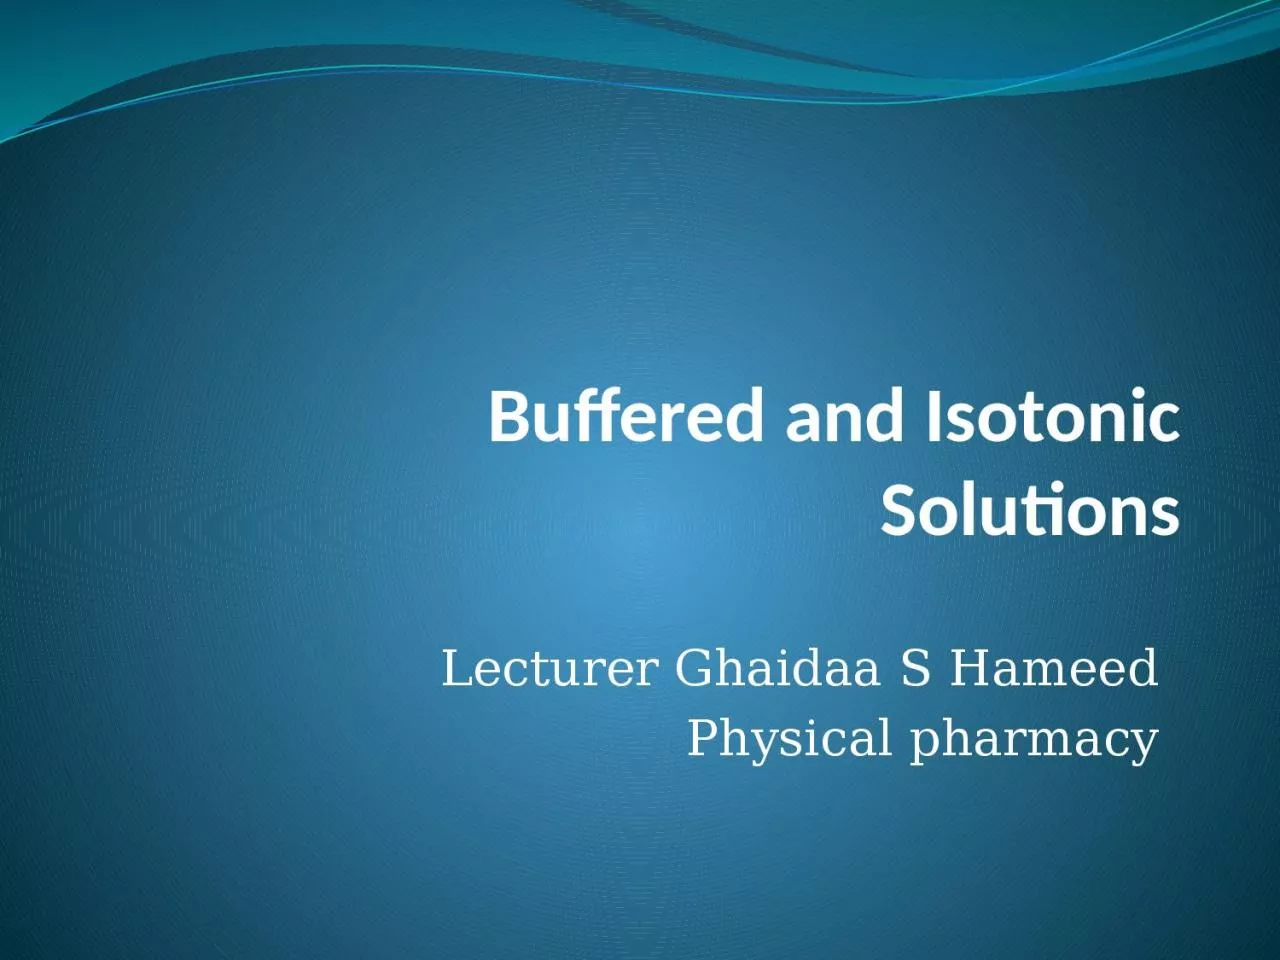 Buffered and Isotonic Solutions